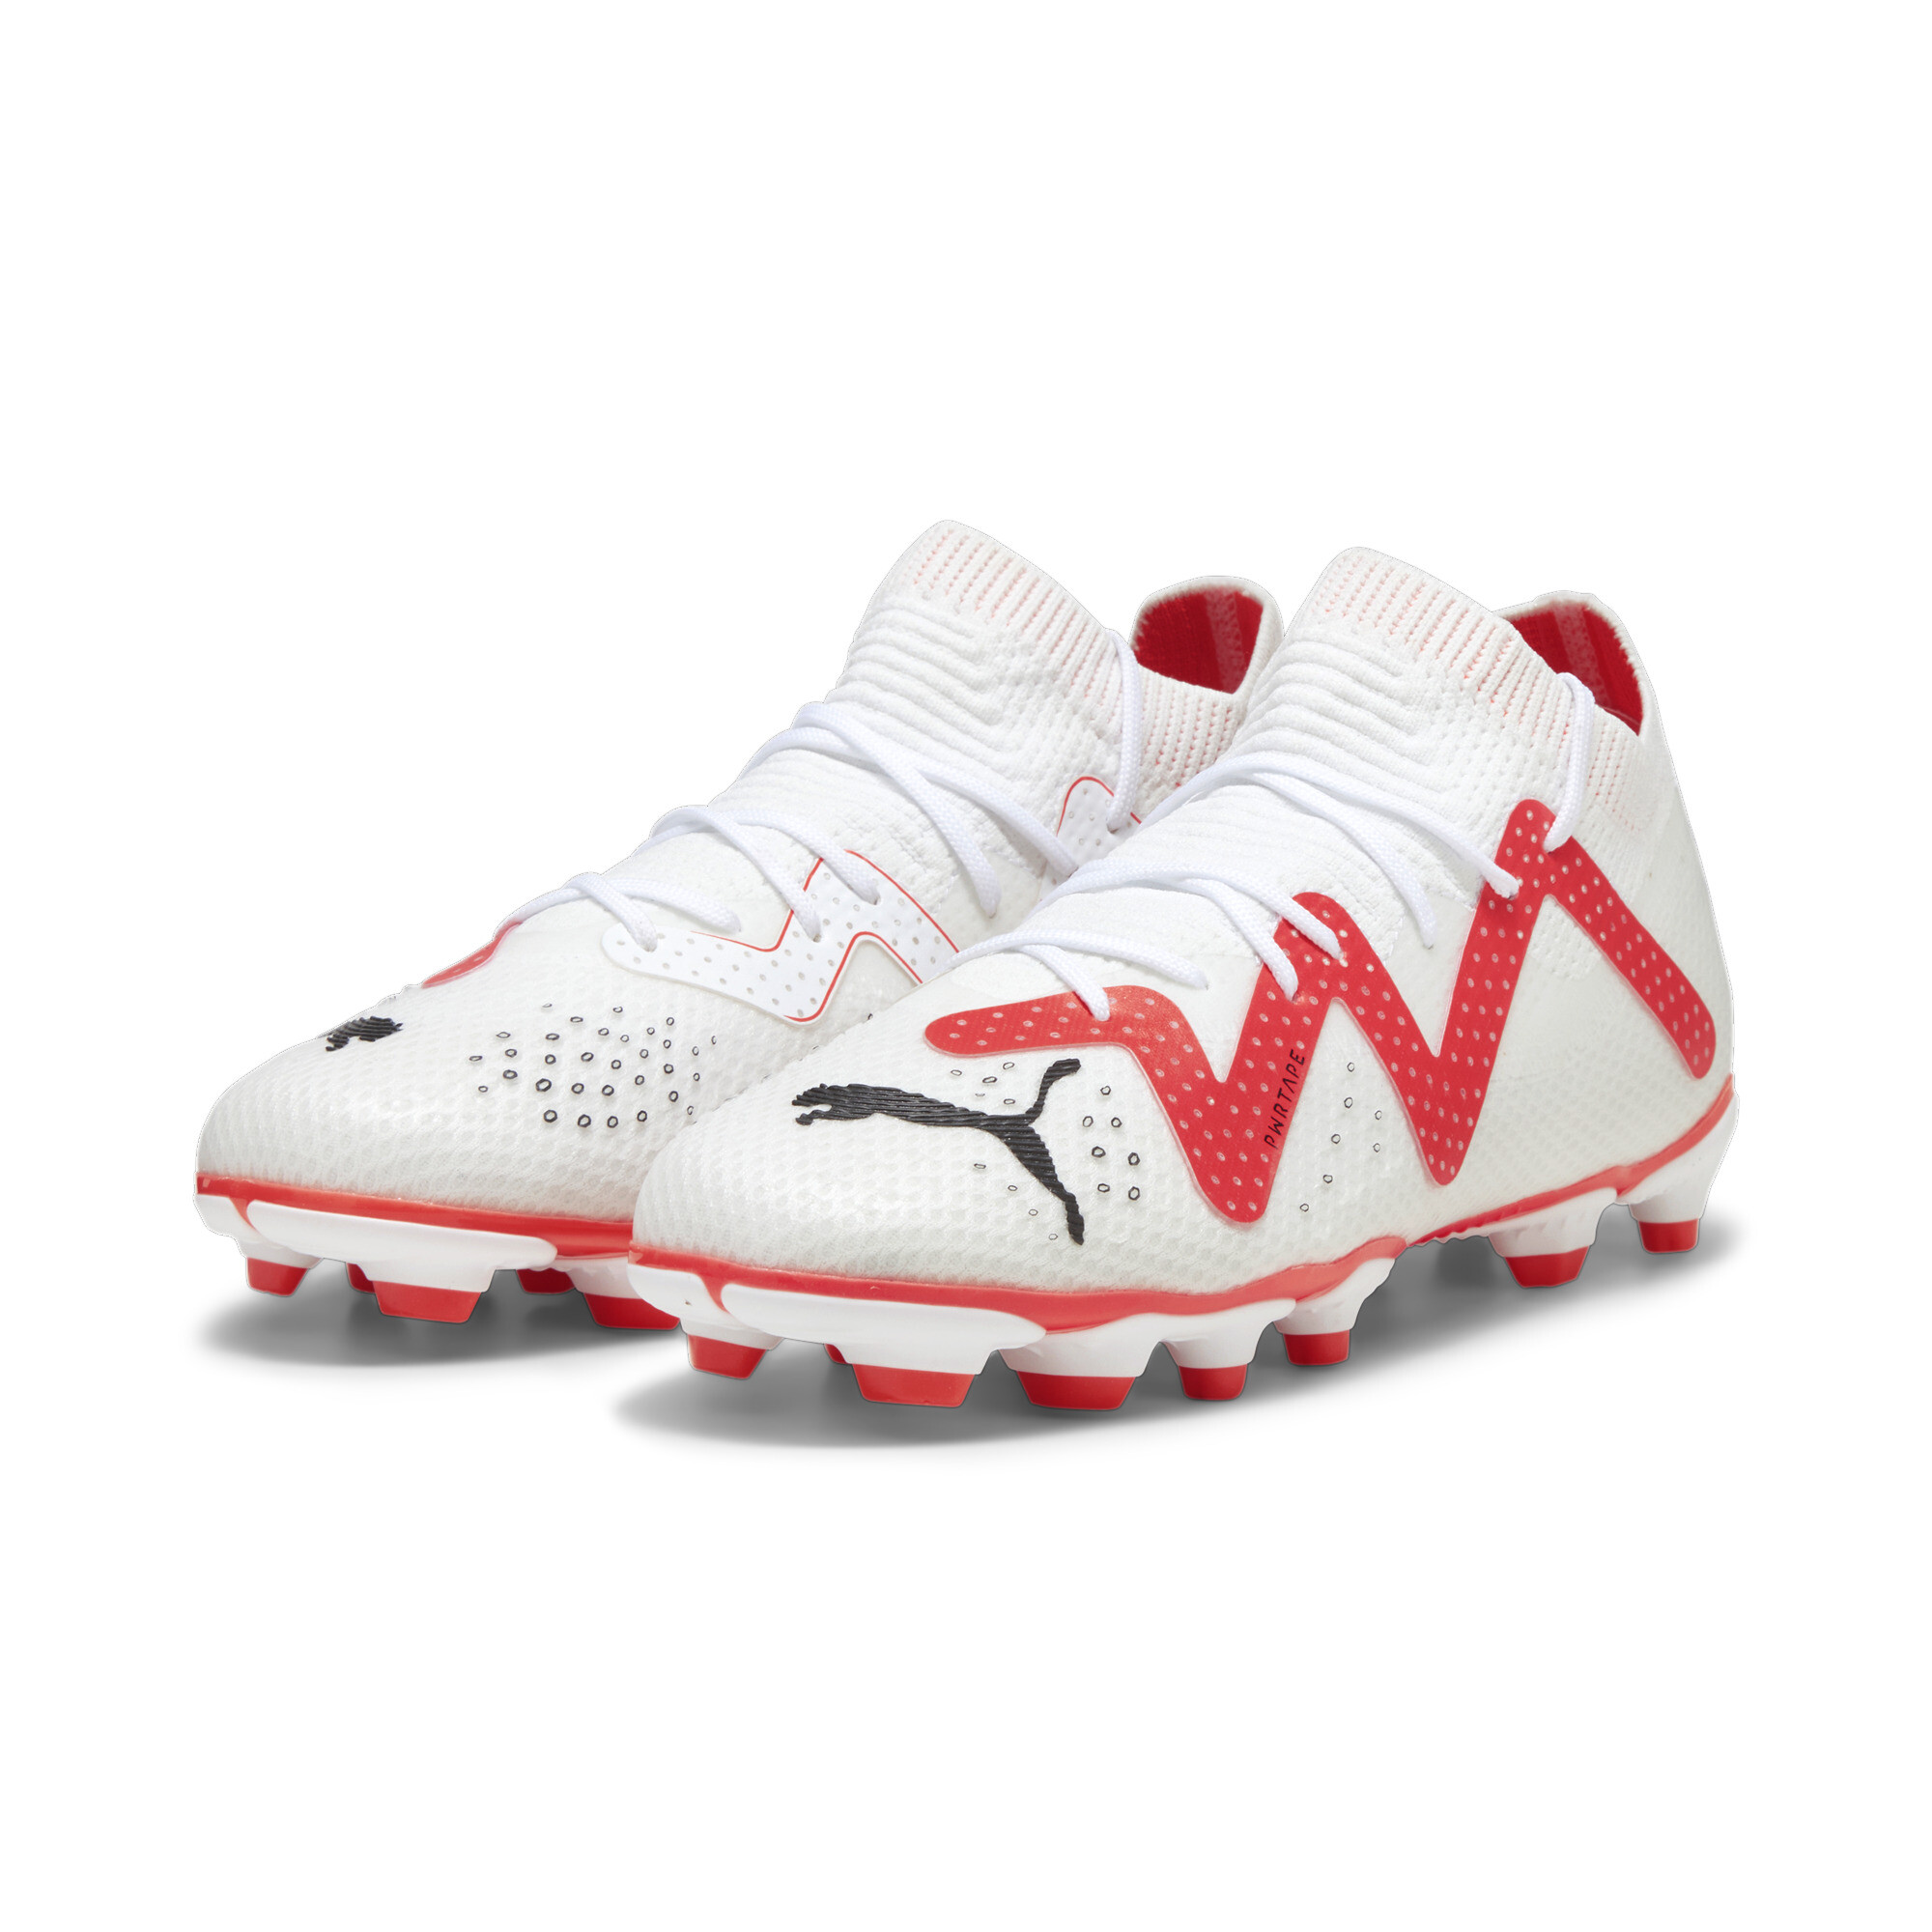 Puma FUTURE PRO FG/AG Youth Football Boots, White, Size 28, Shoes